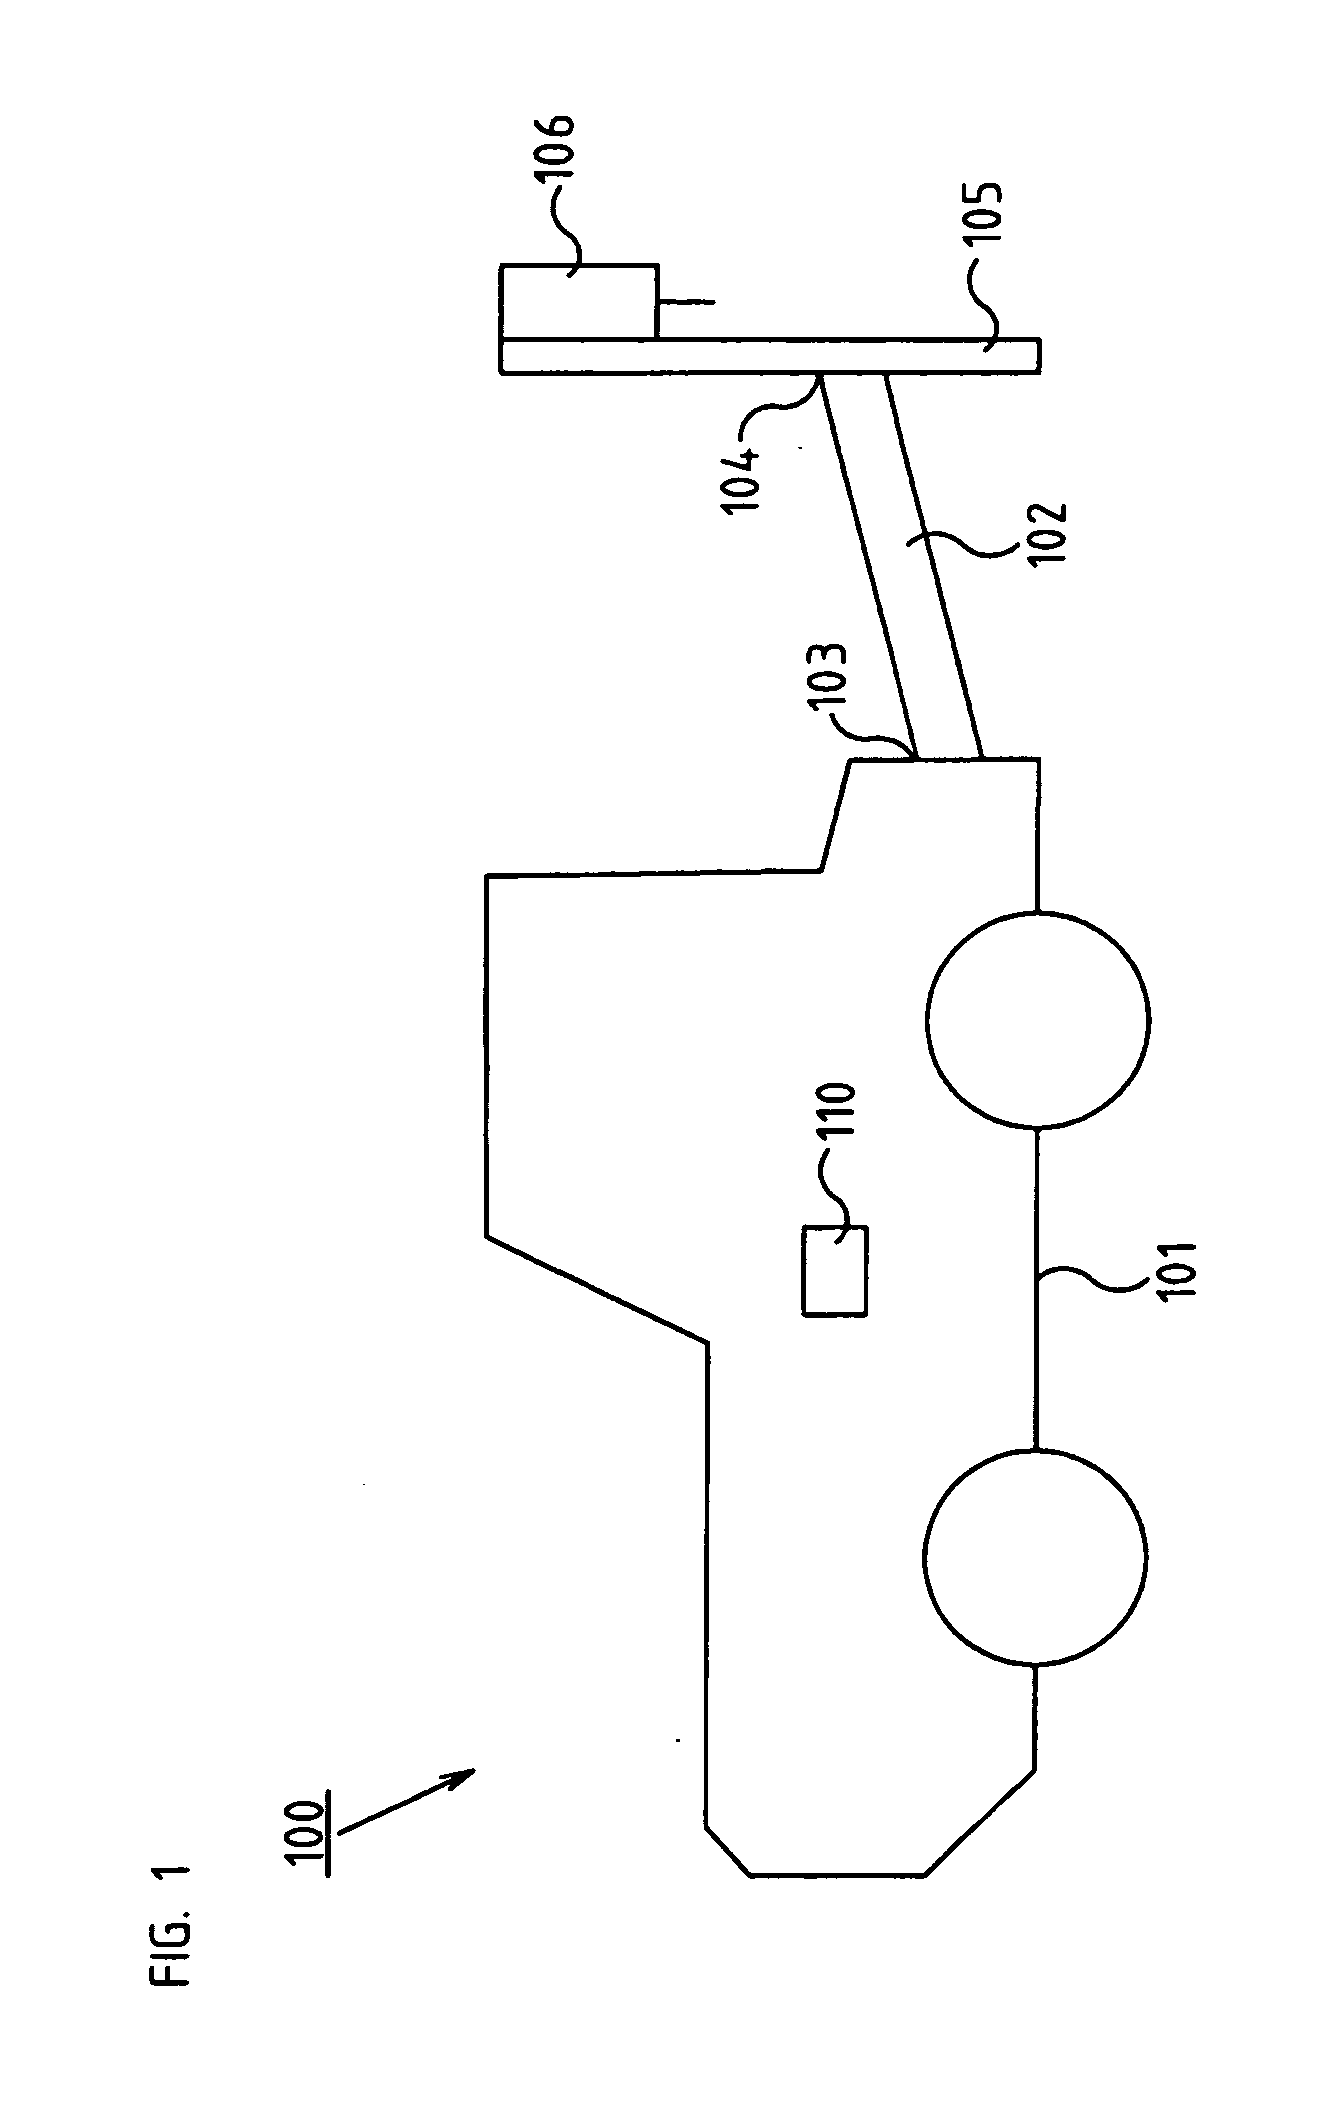 Method, System And Rock Drilling Apparatus For Installing A Pipe In Drilled Holes In Rock Drilling